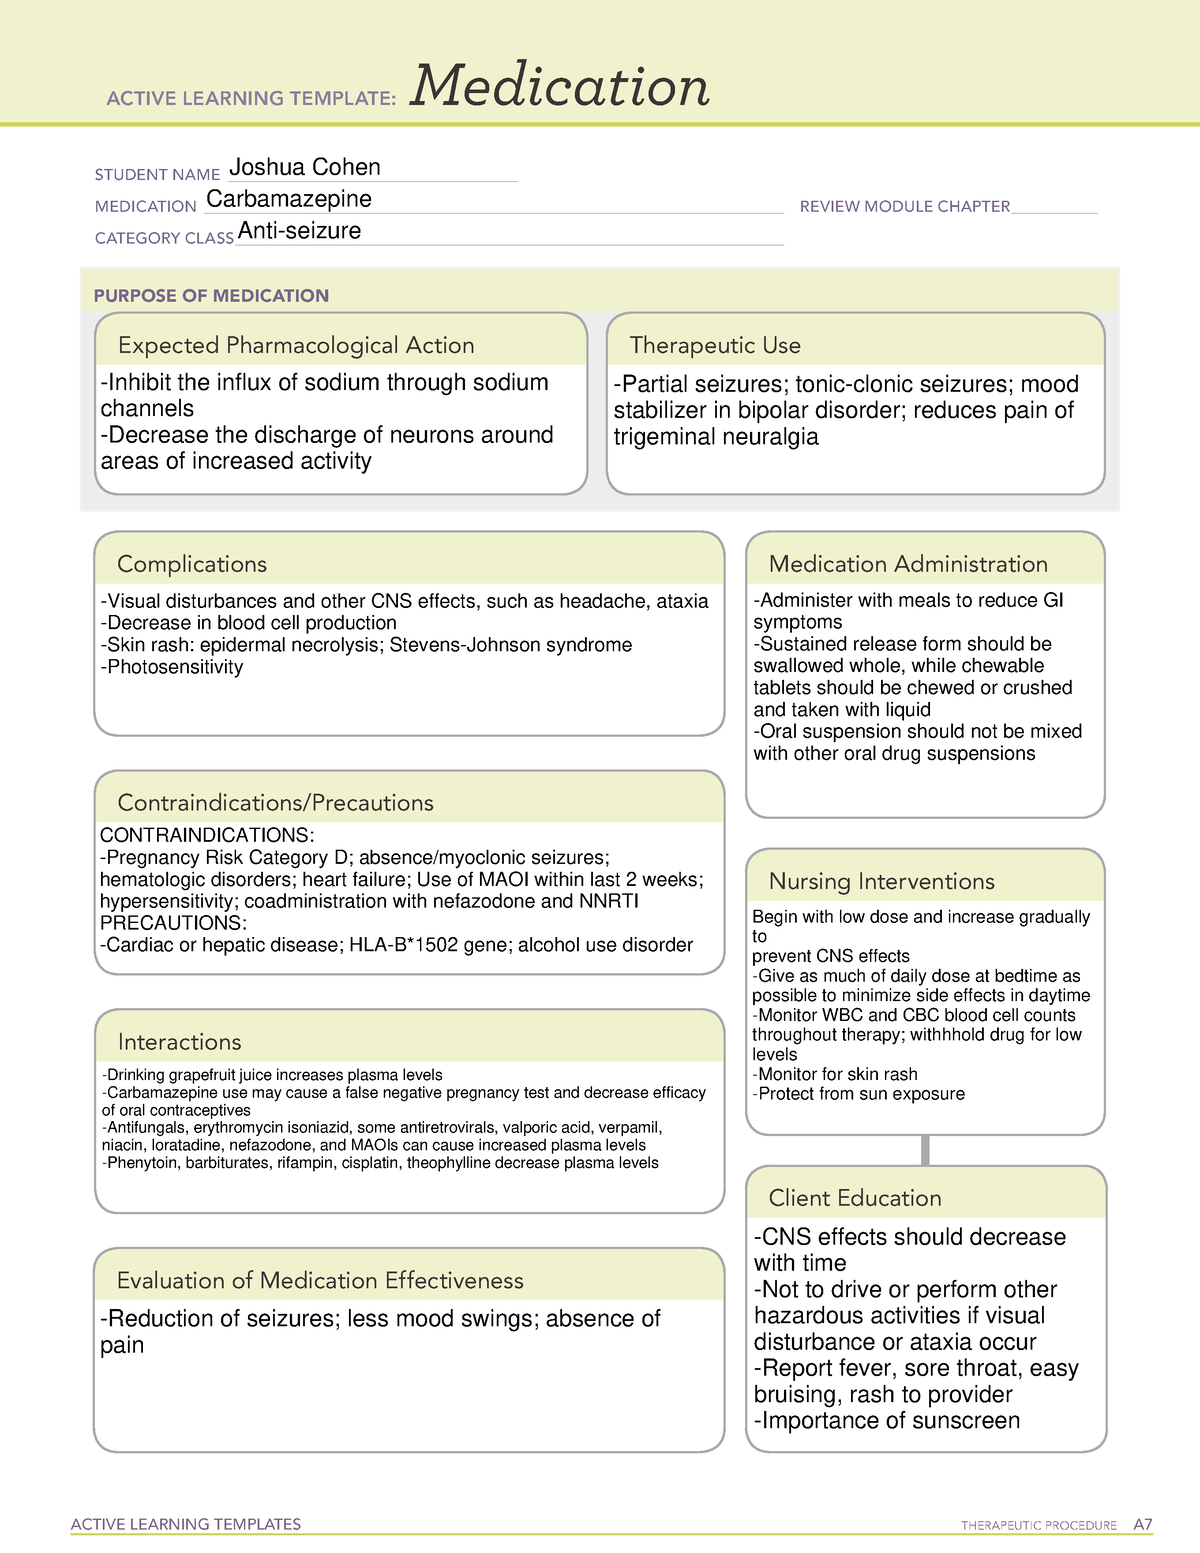 carbamazepine-drug-template-active-learning-templates-therapeutic